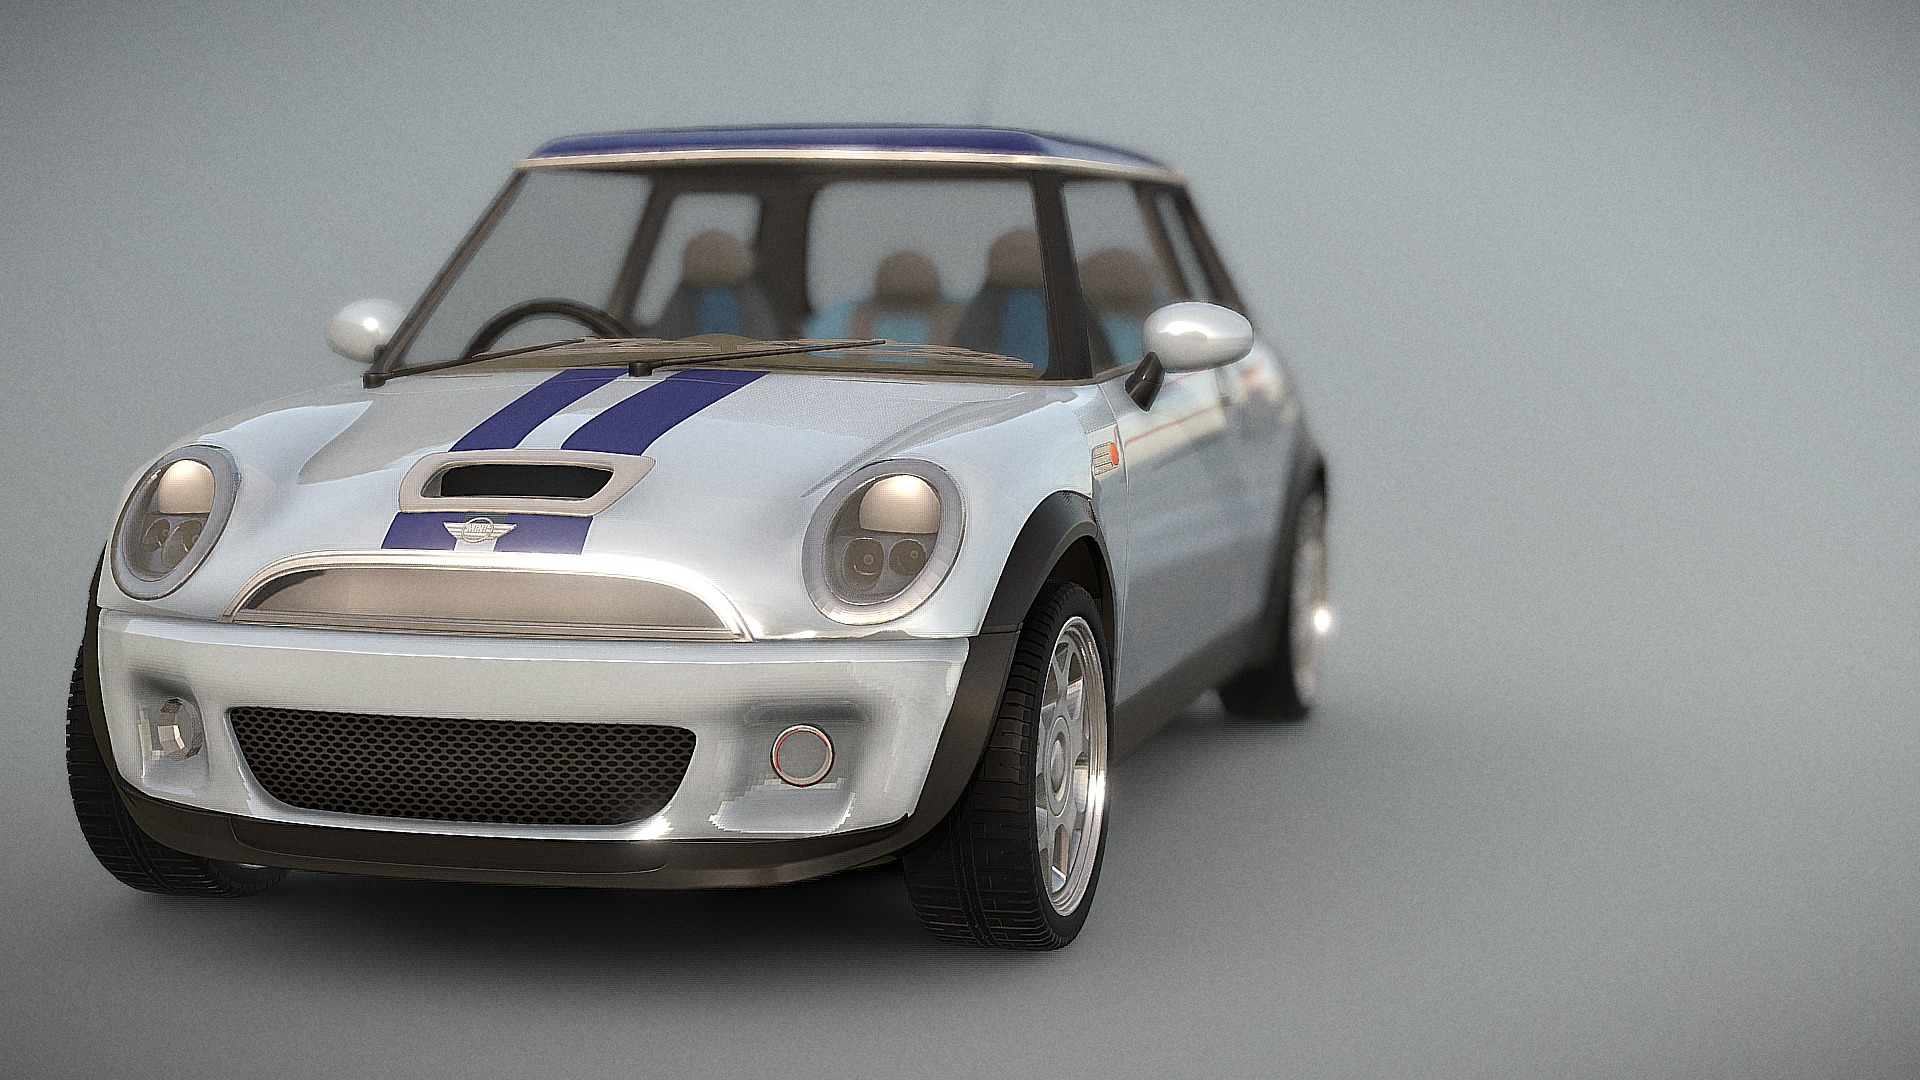 3D model Mini cooper Model - This is a 3D model of the Mini cooper Model. The 3D model is about a silver car with a blue stripe.